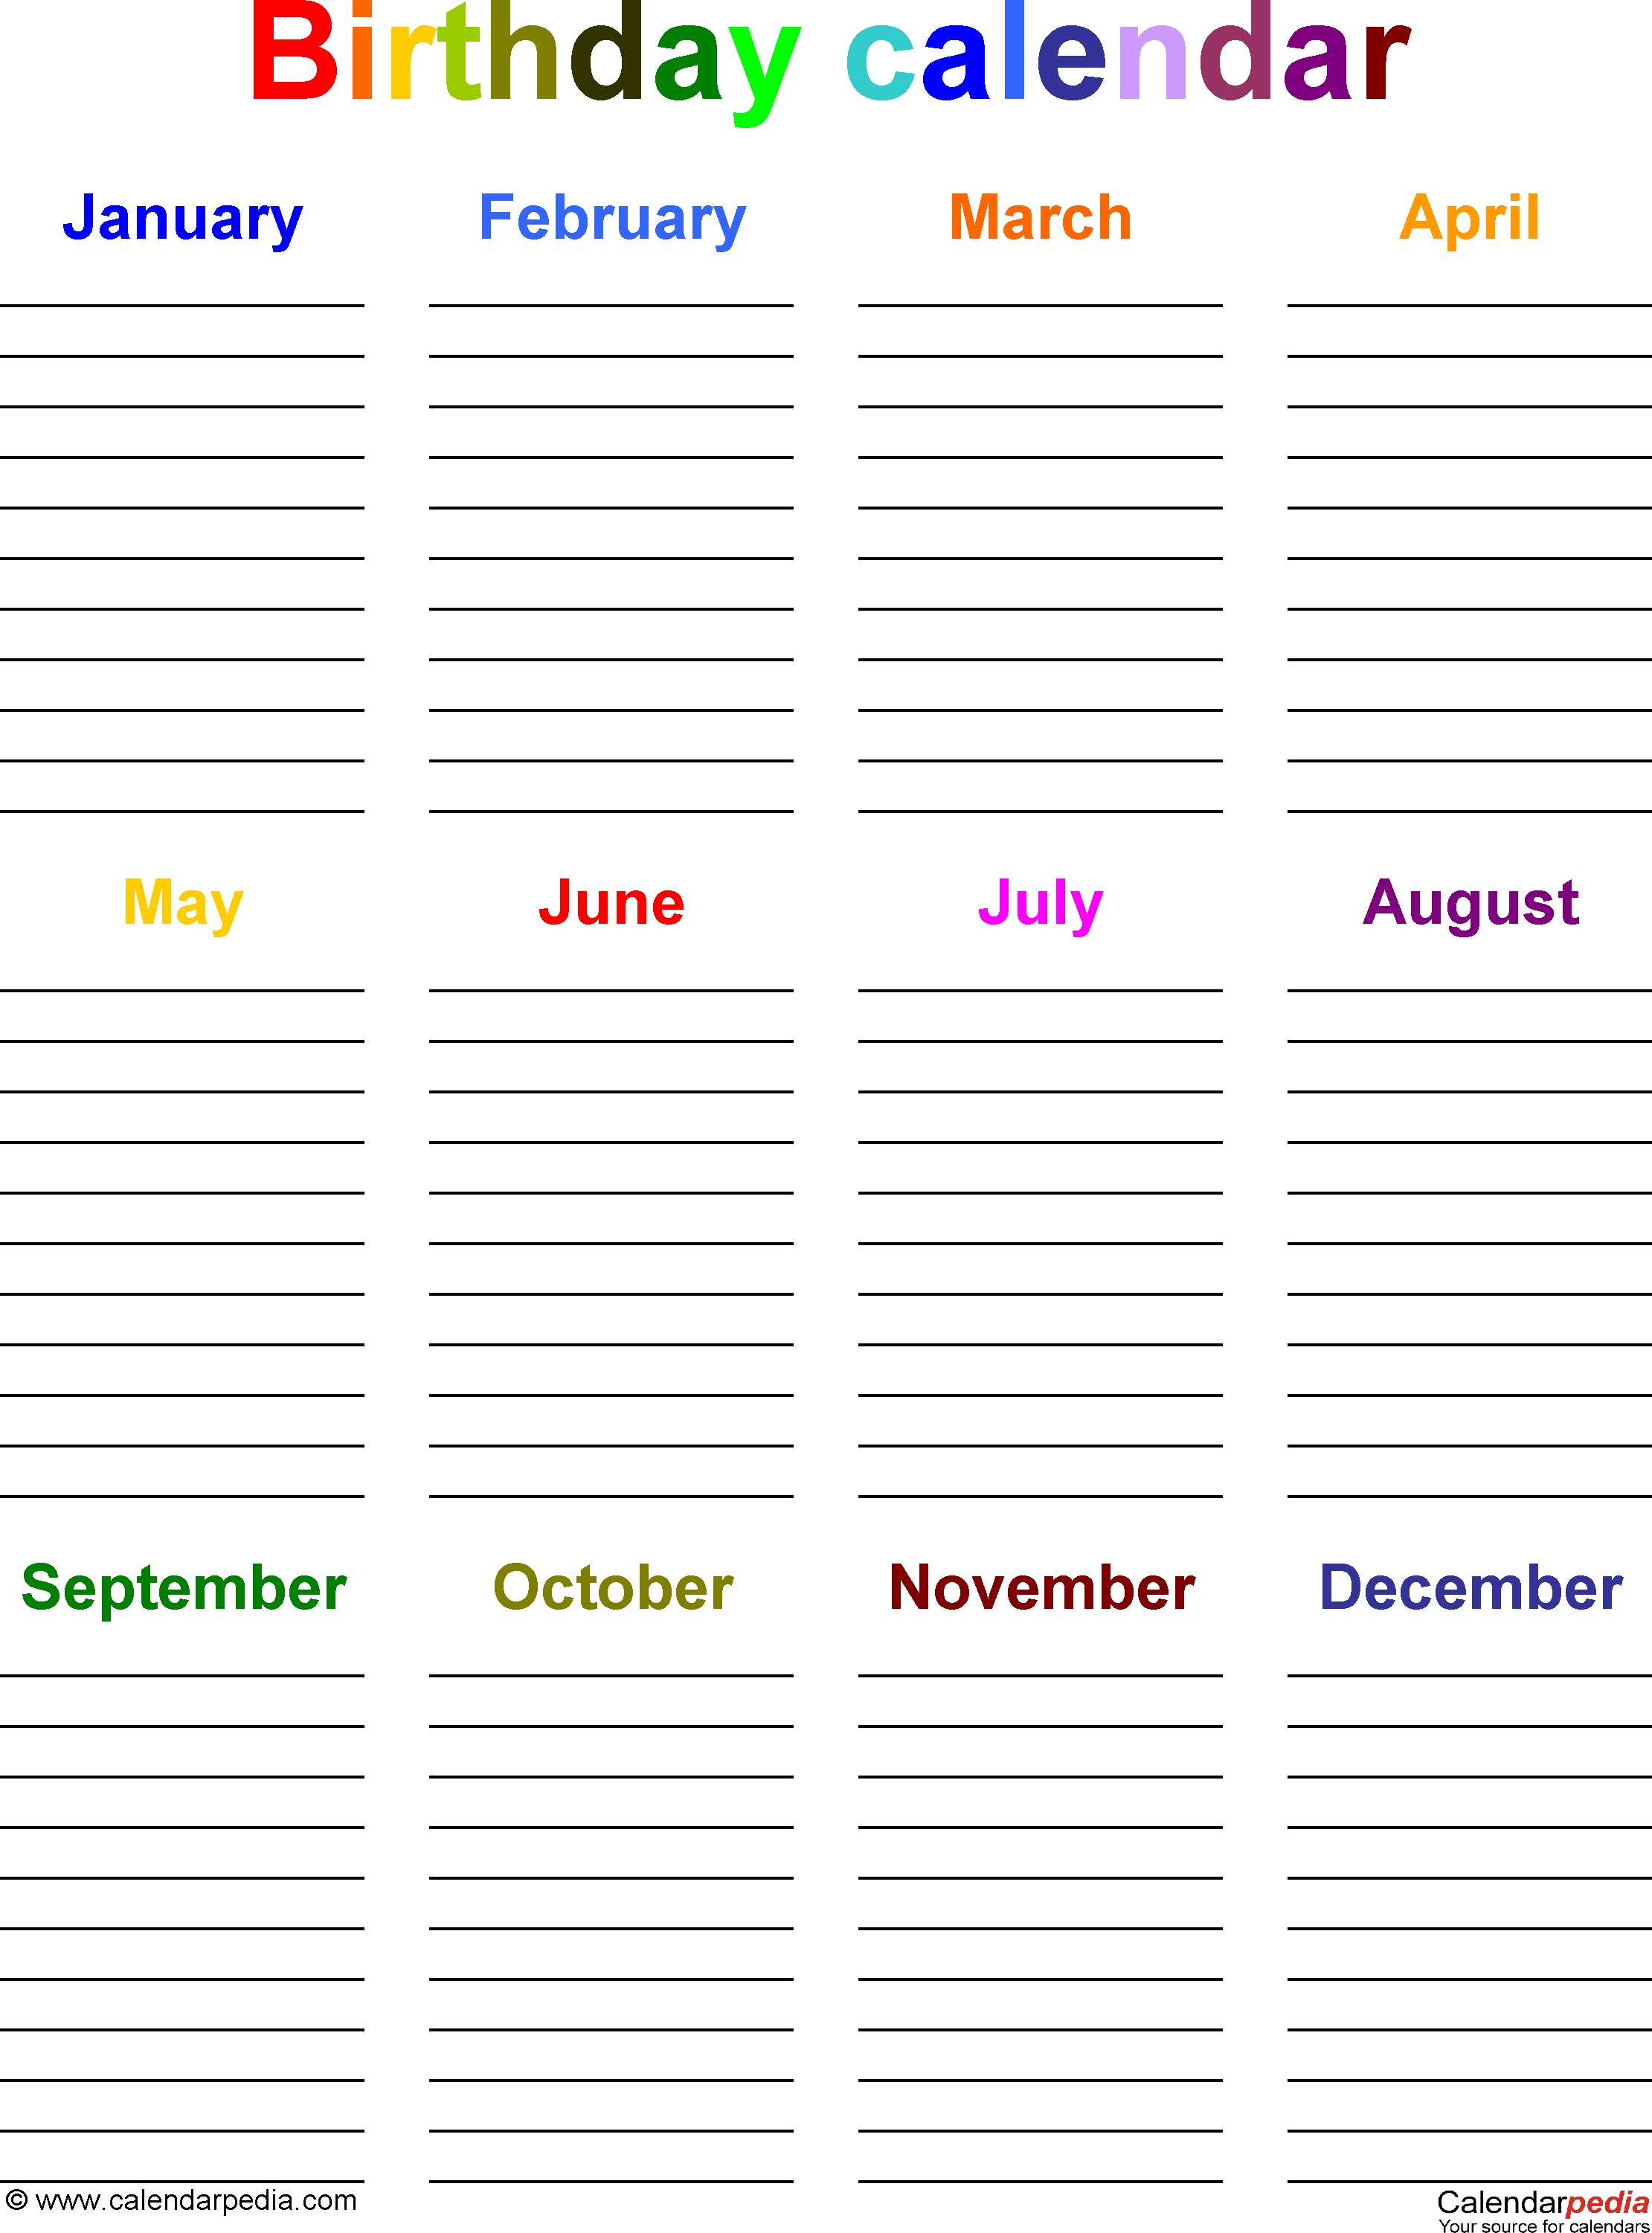 Template 5: Pdf Template For Birthday Calendar In Color